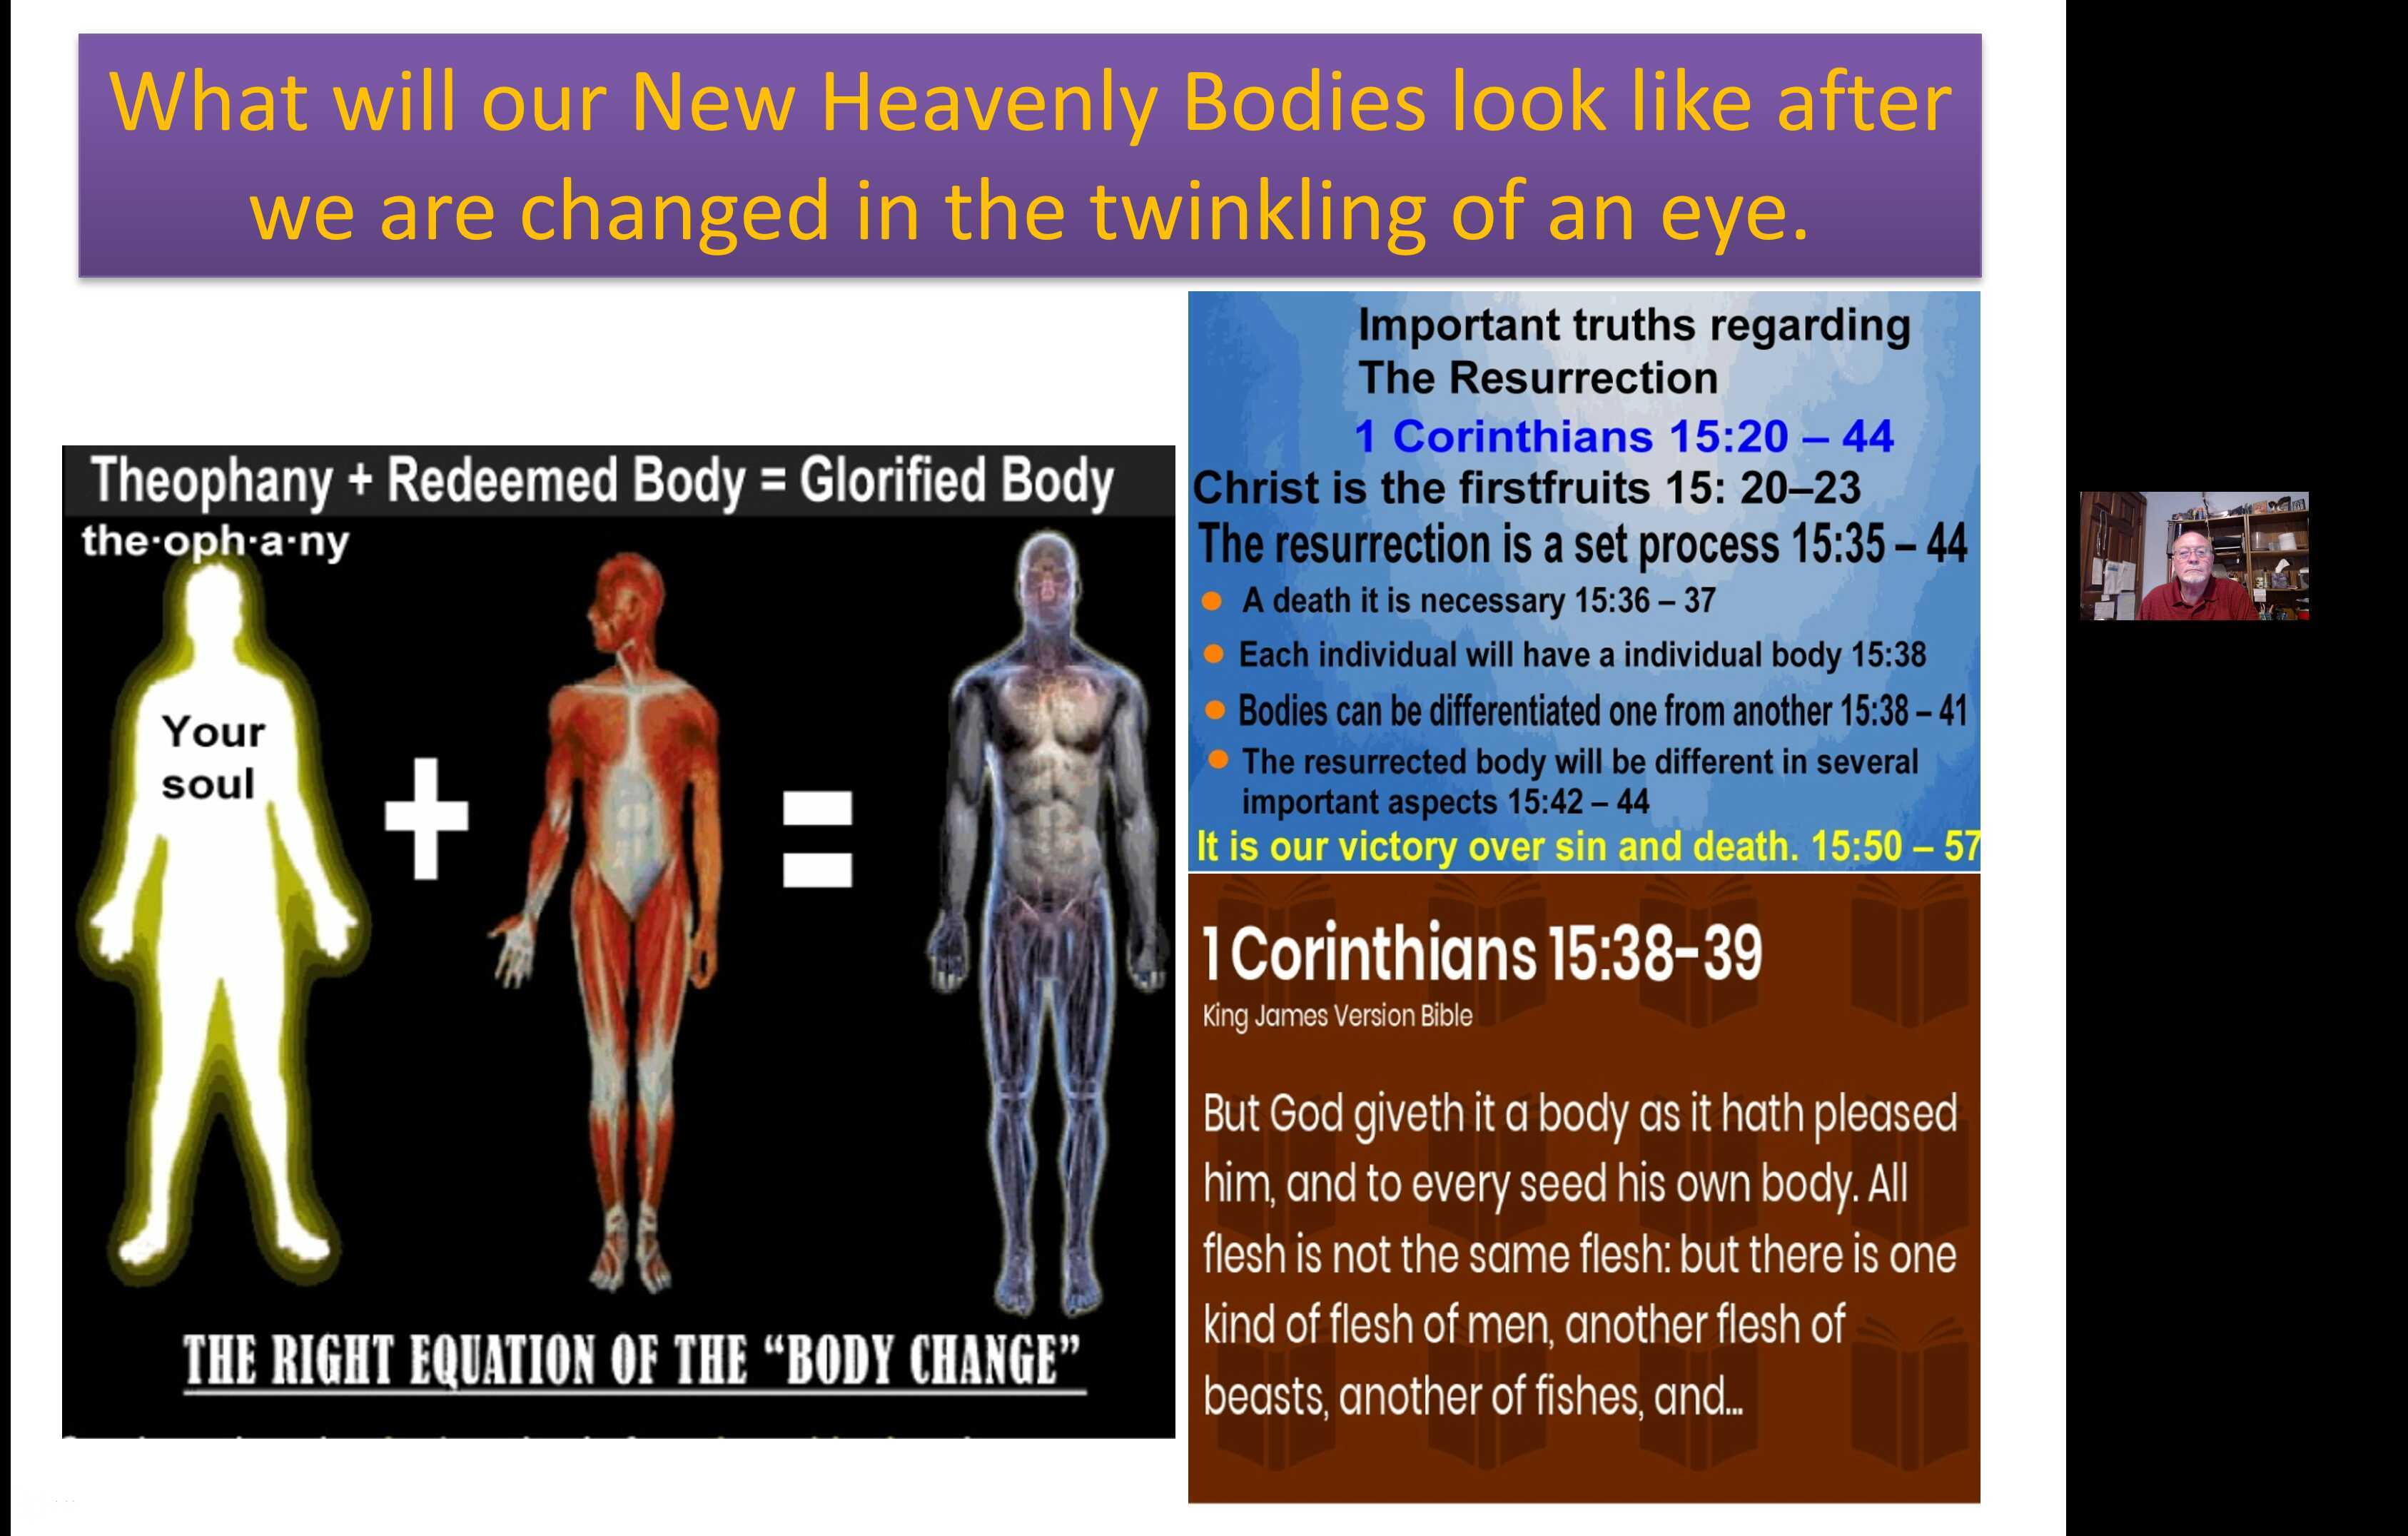 What will our New Heavenly Bodies look like